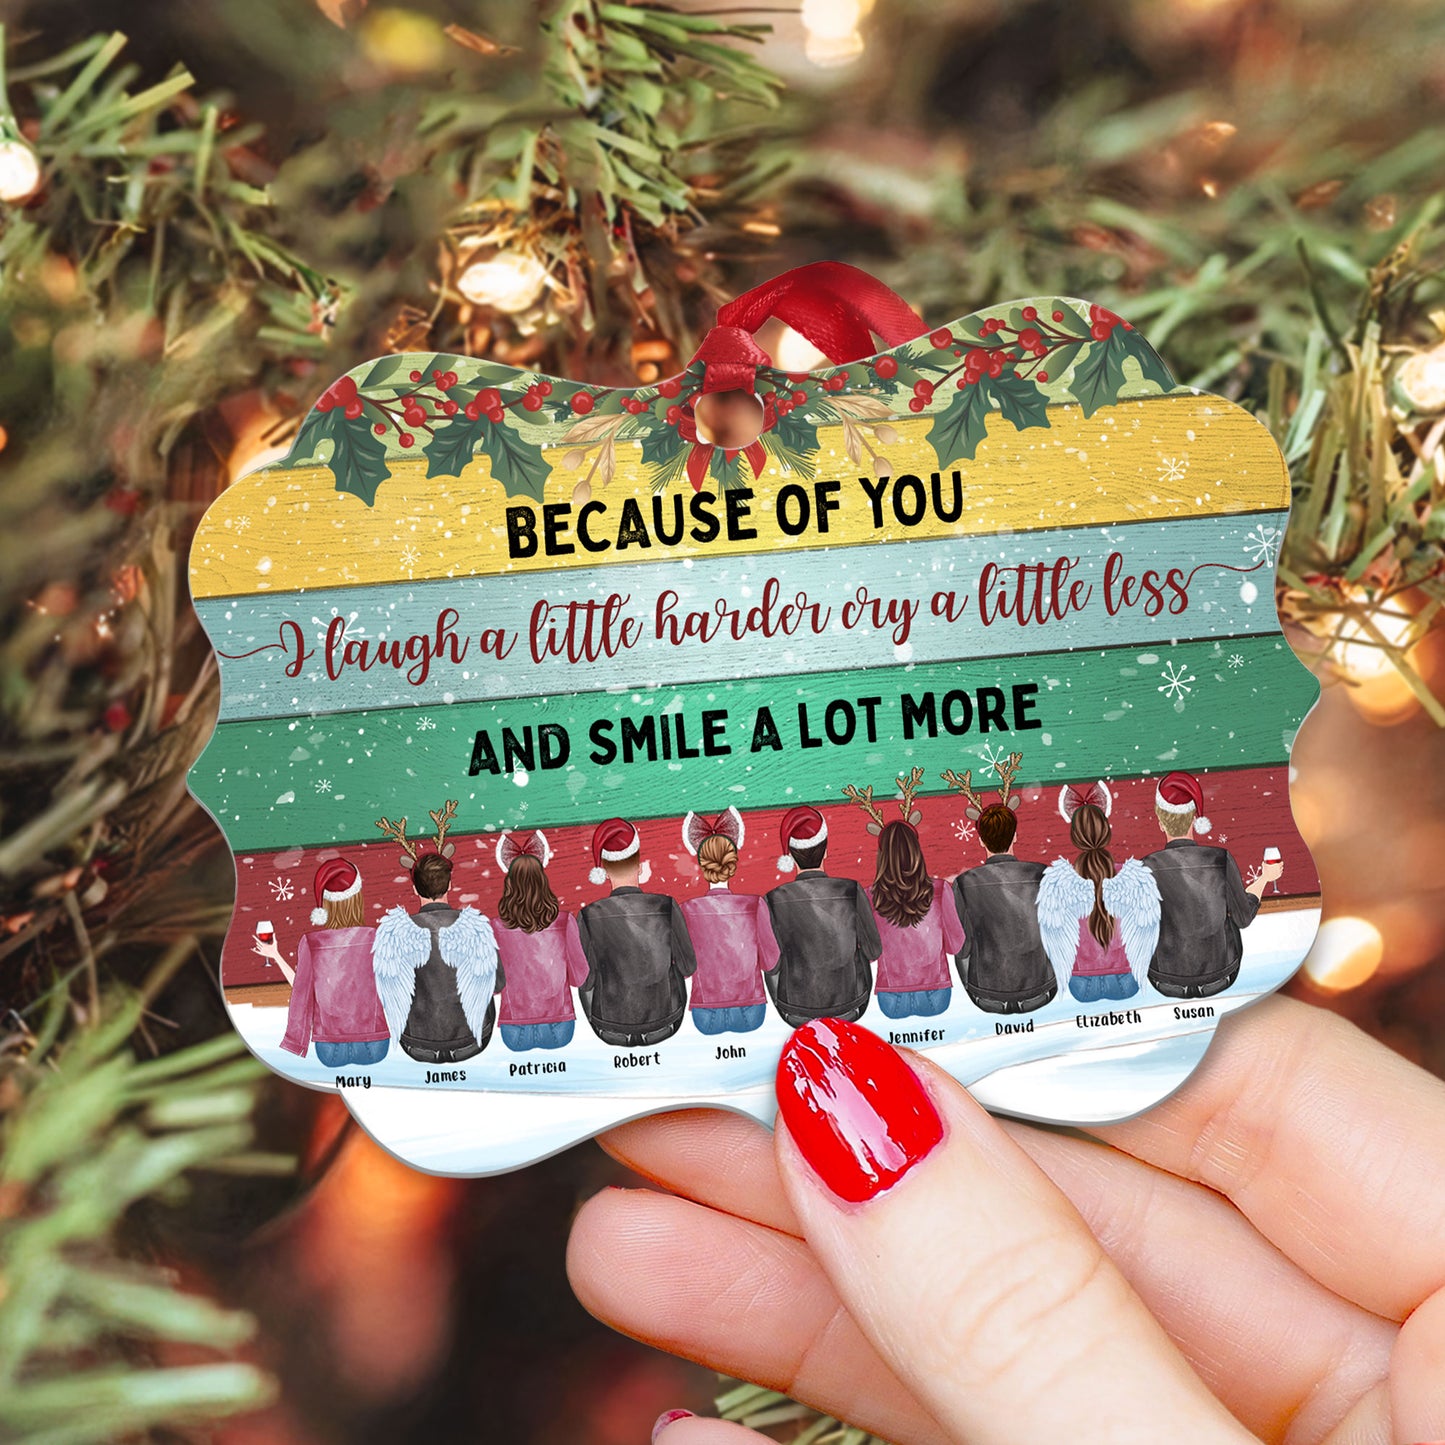 Because of You I Laugh a Little Harder - Personalized Aluminum Ornament - Christmas Gift For Sibling Ver 3